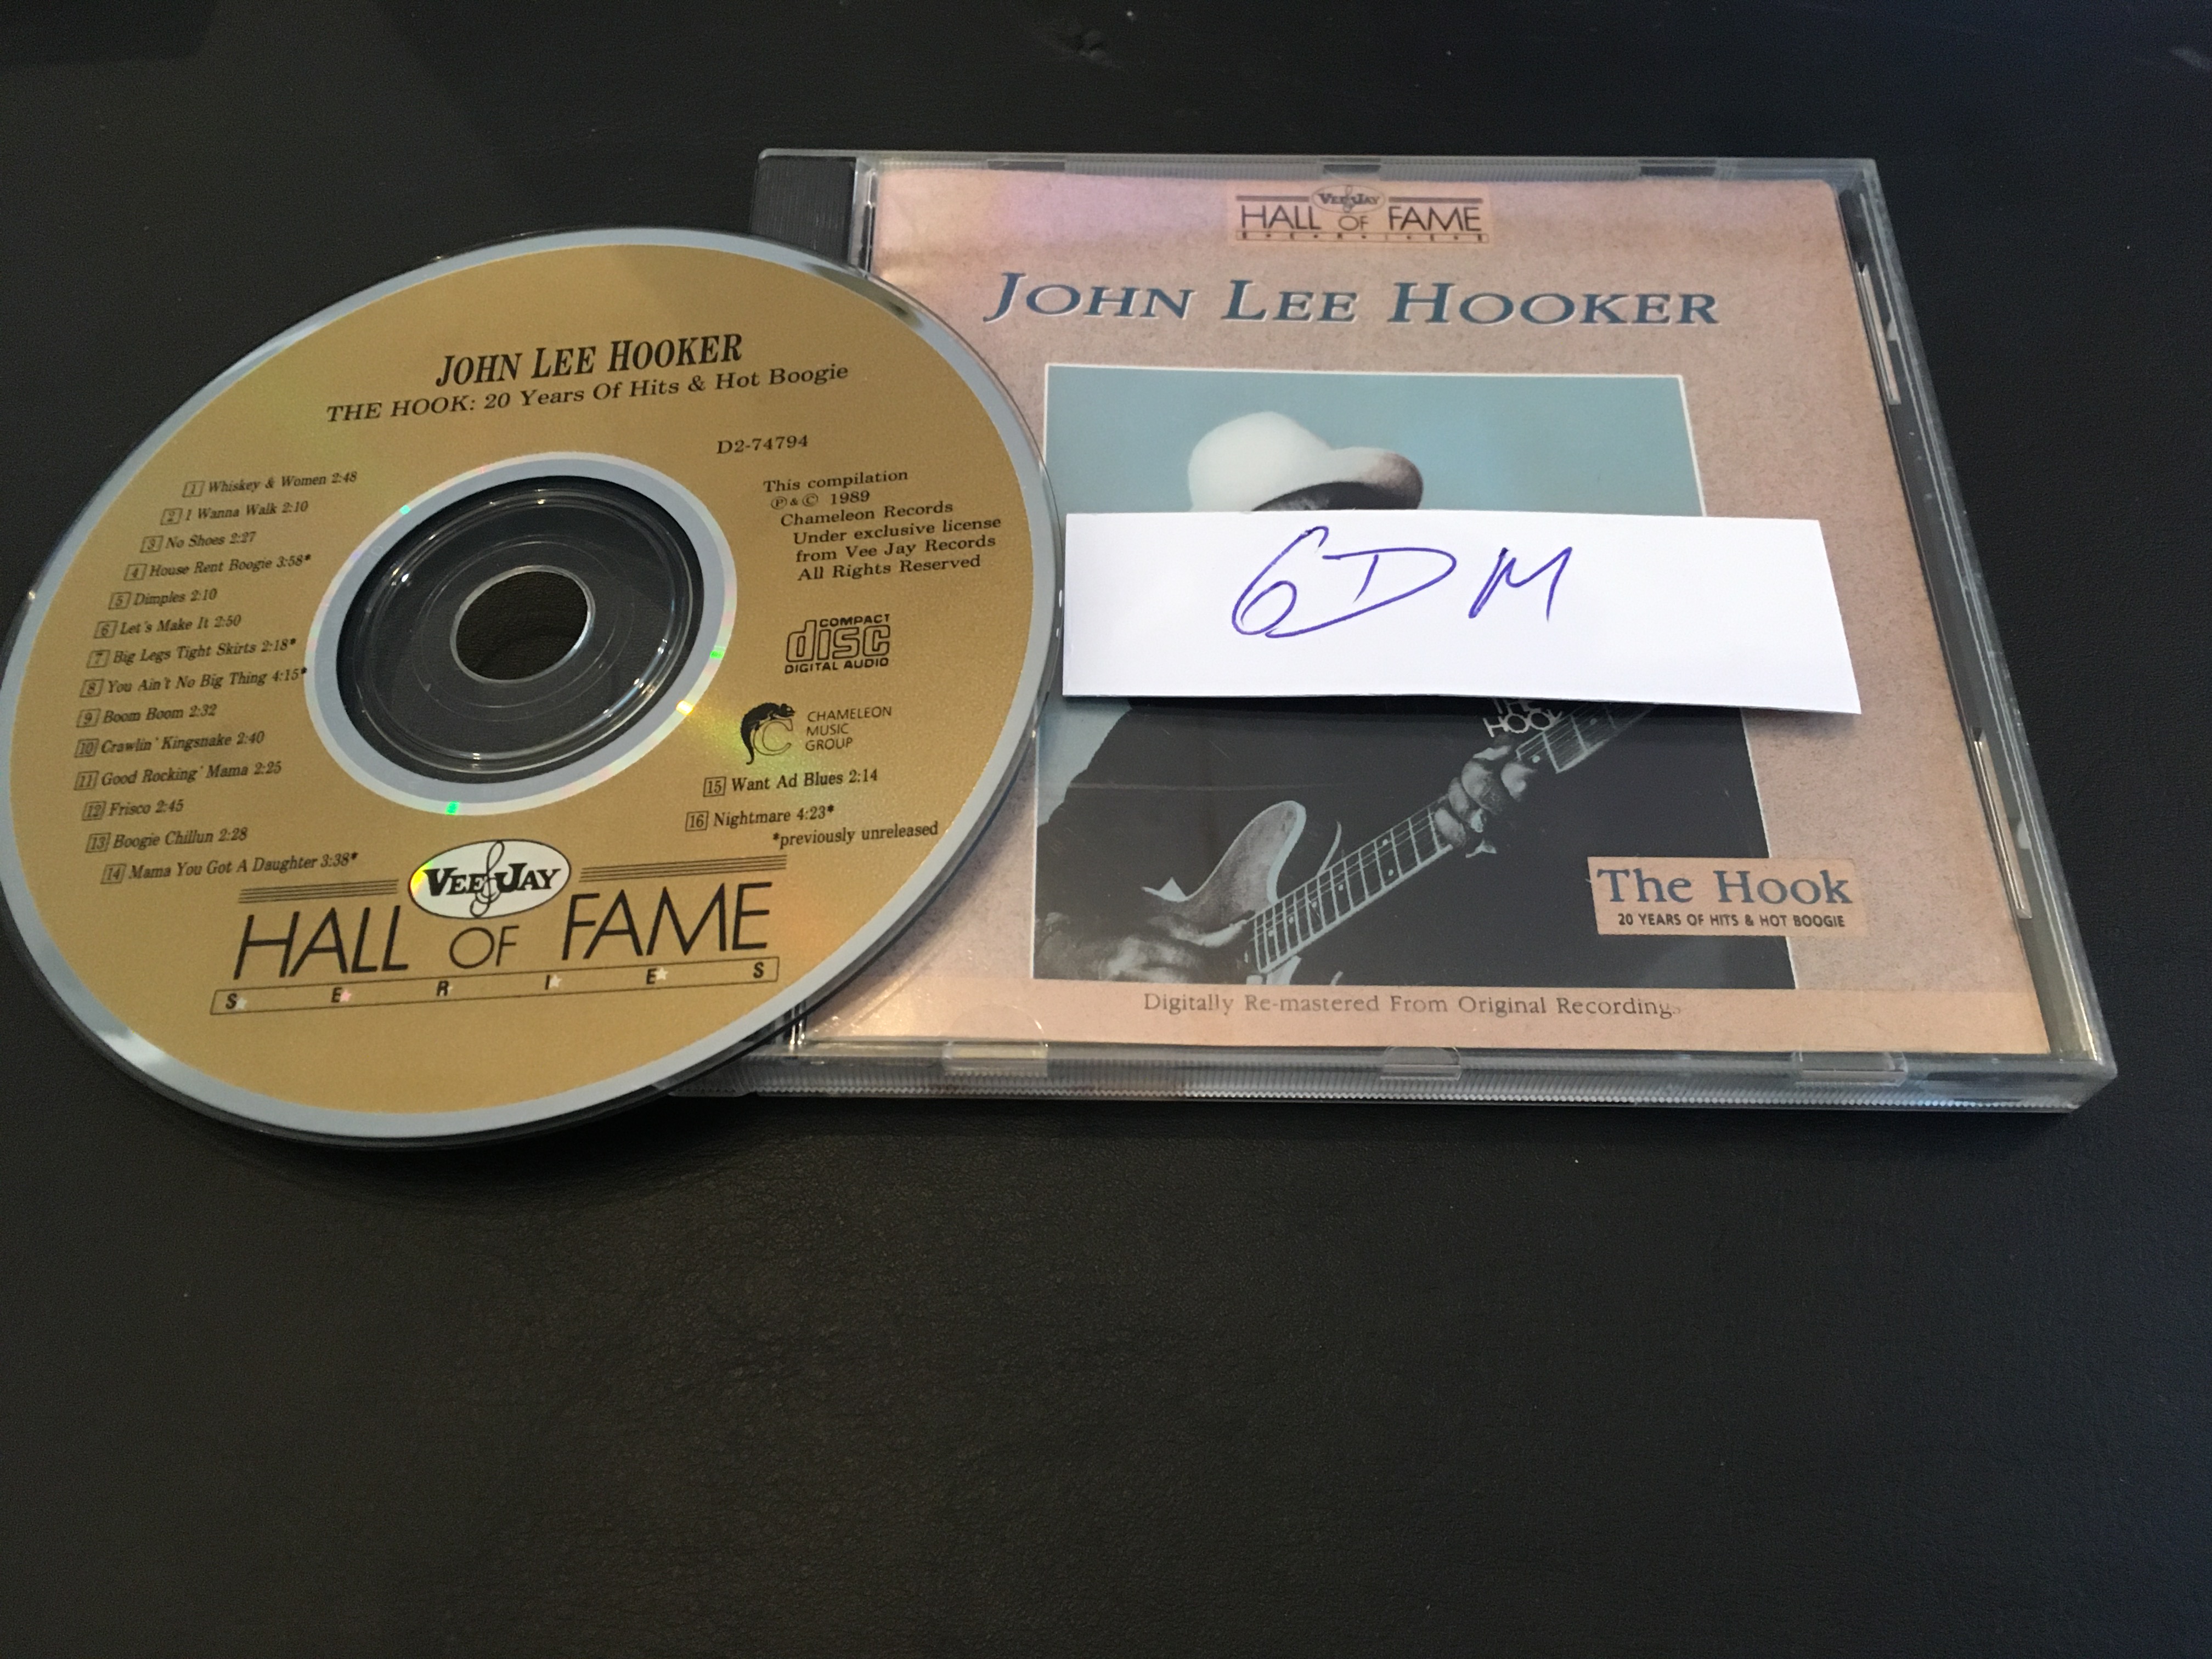 John Lee Hooker-The Hook 20 Years Of Hits and Hot Boogie-(D2-74794)-CD-FLAC-1989-6DM Download